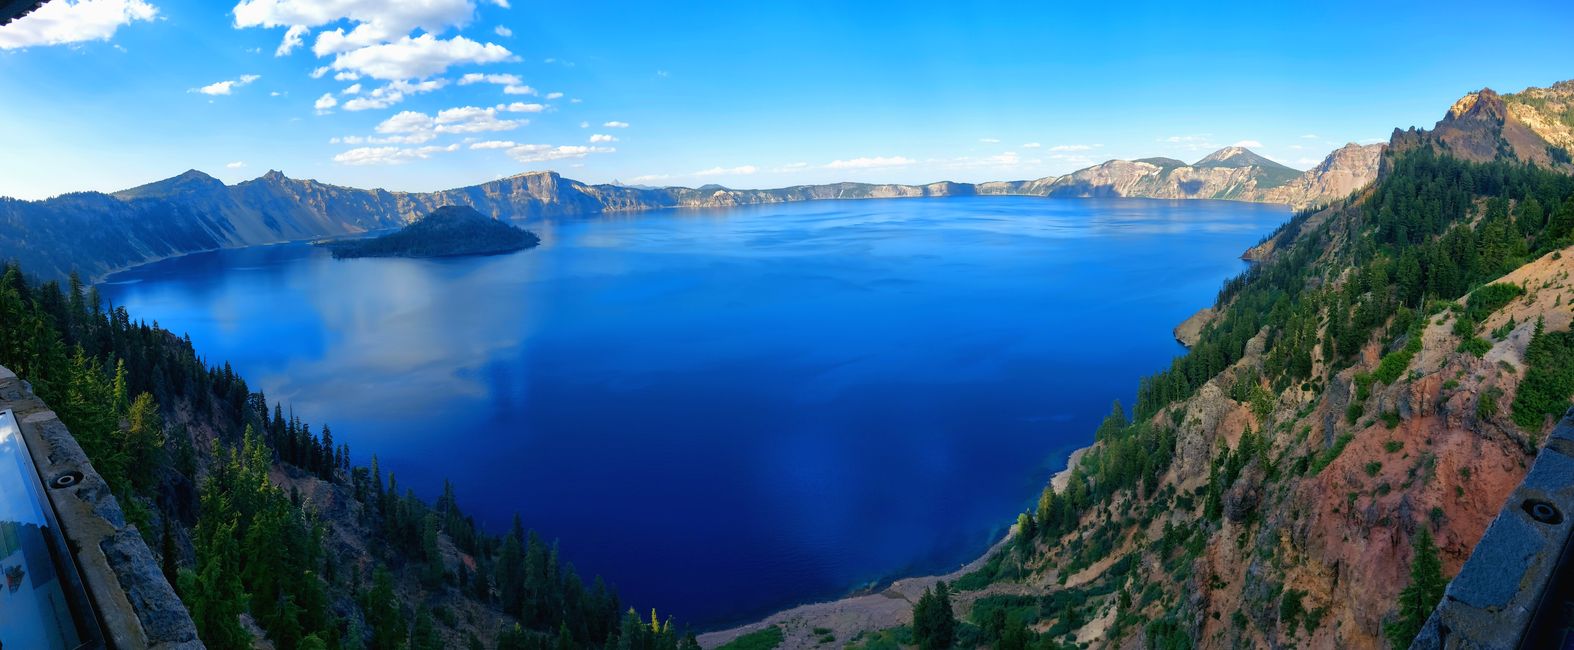 The deep blue Crater Lake